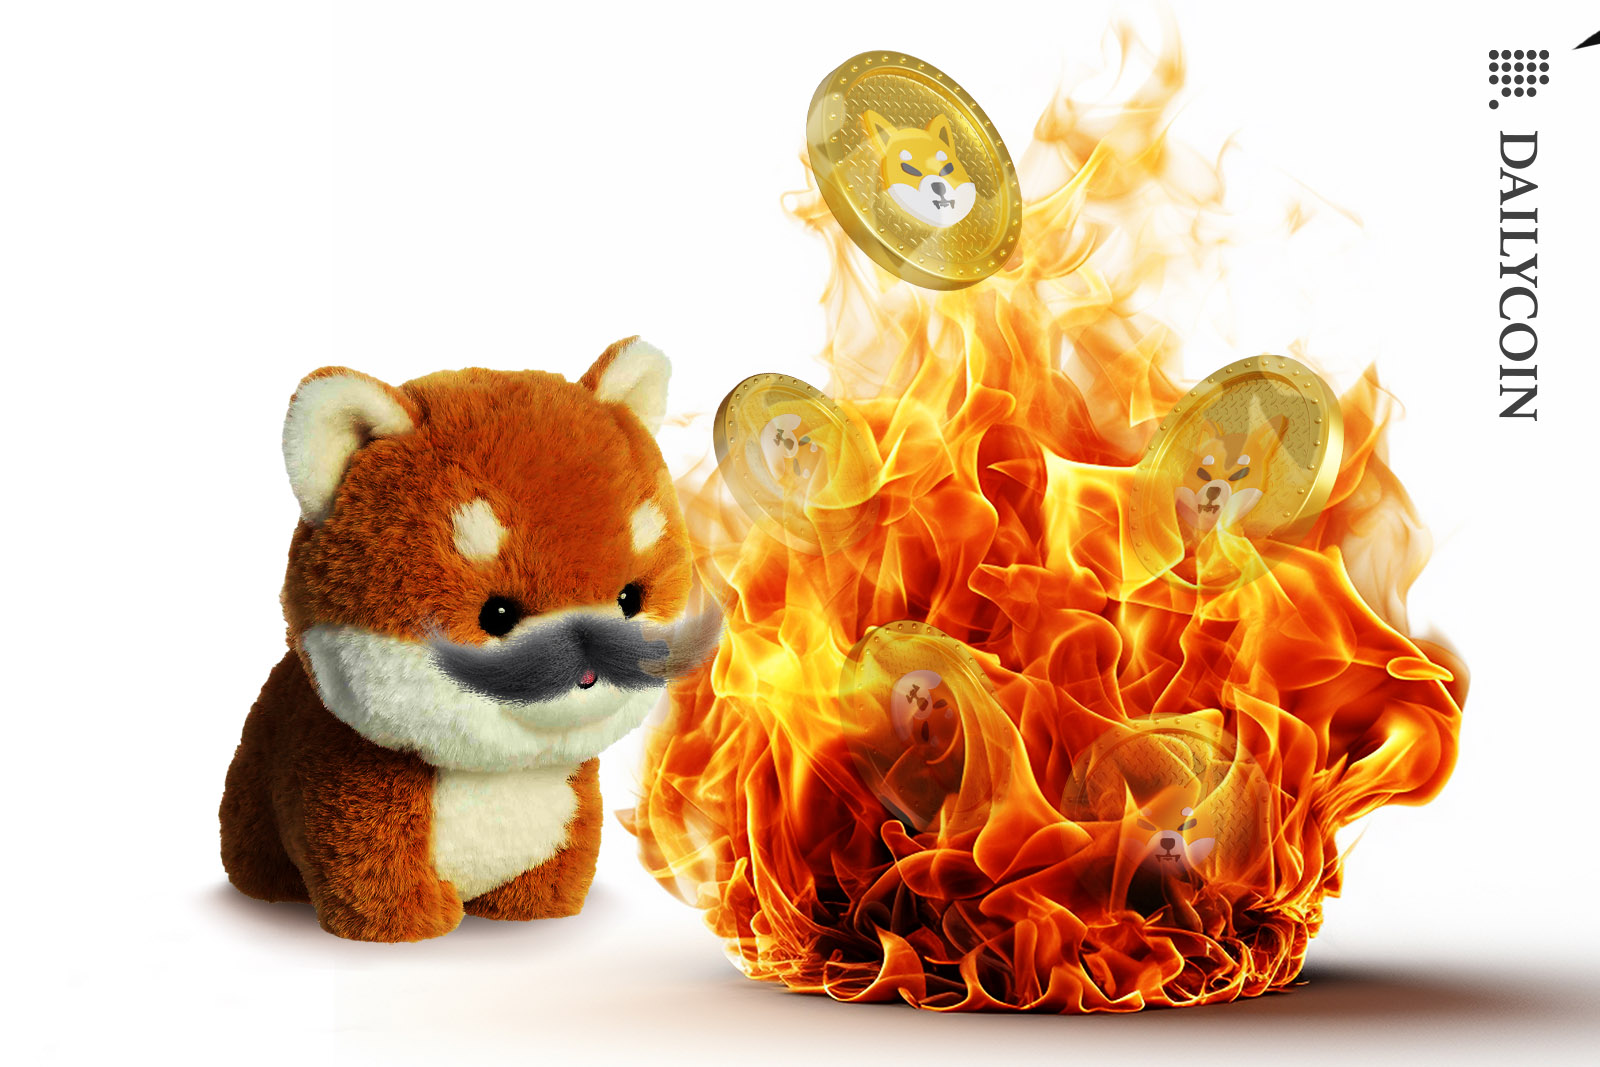 Shiba inu tokens in a fire and puppy shiba plush is getting old.